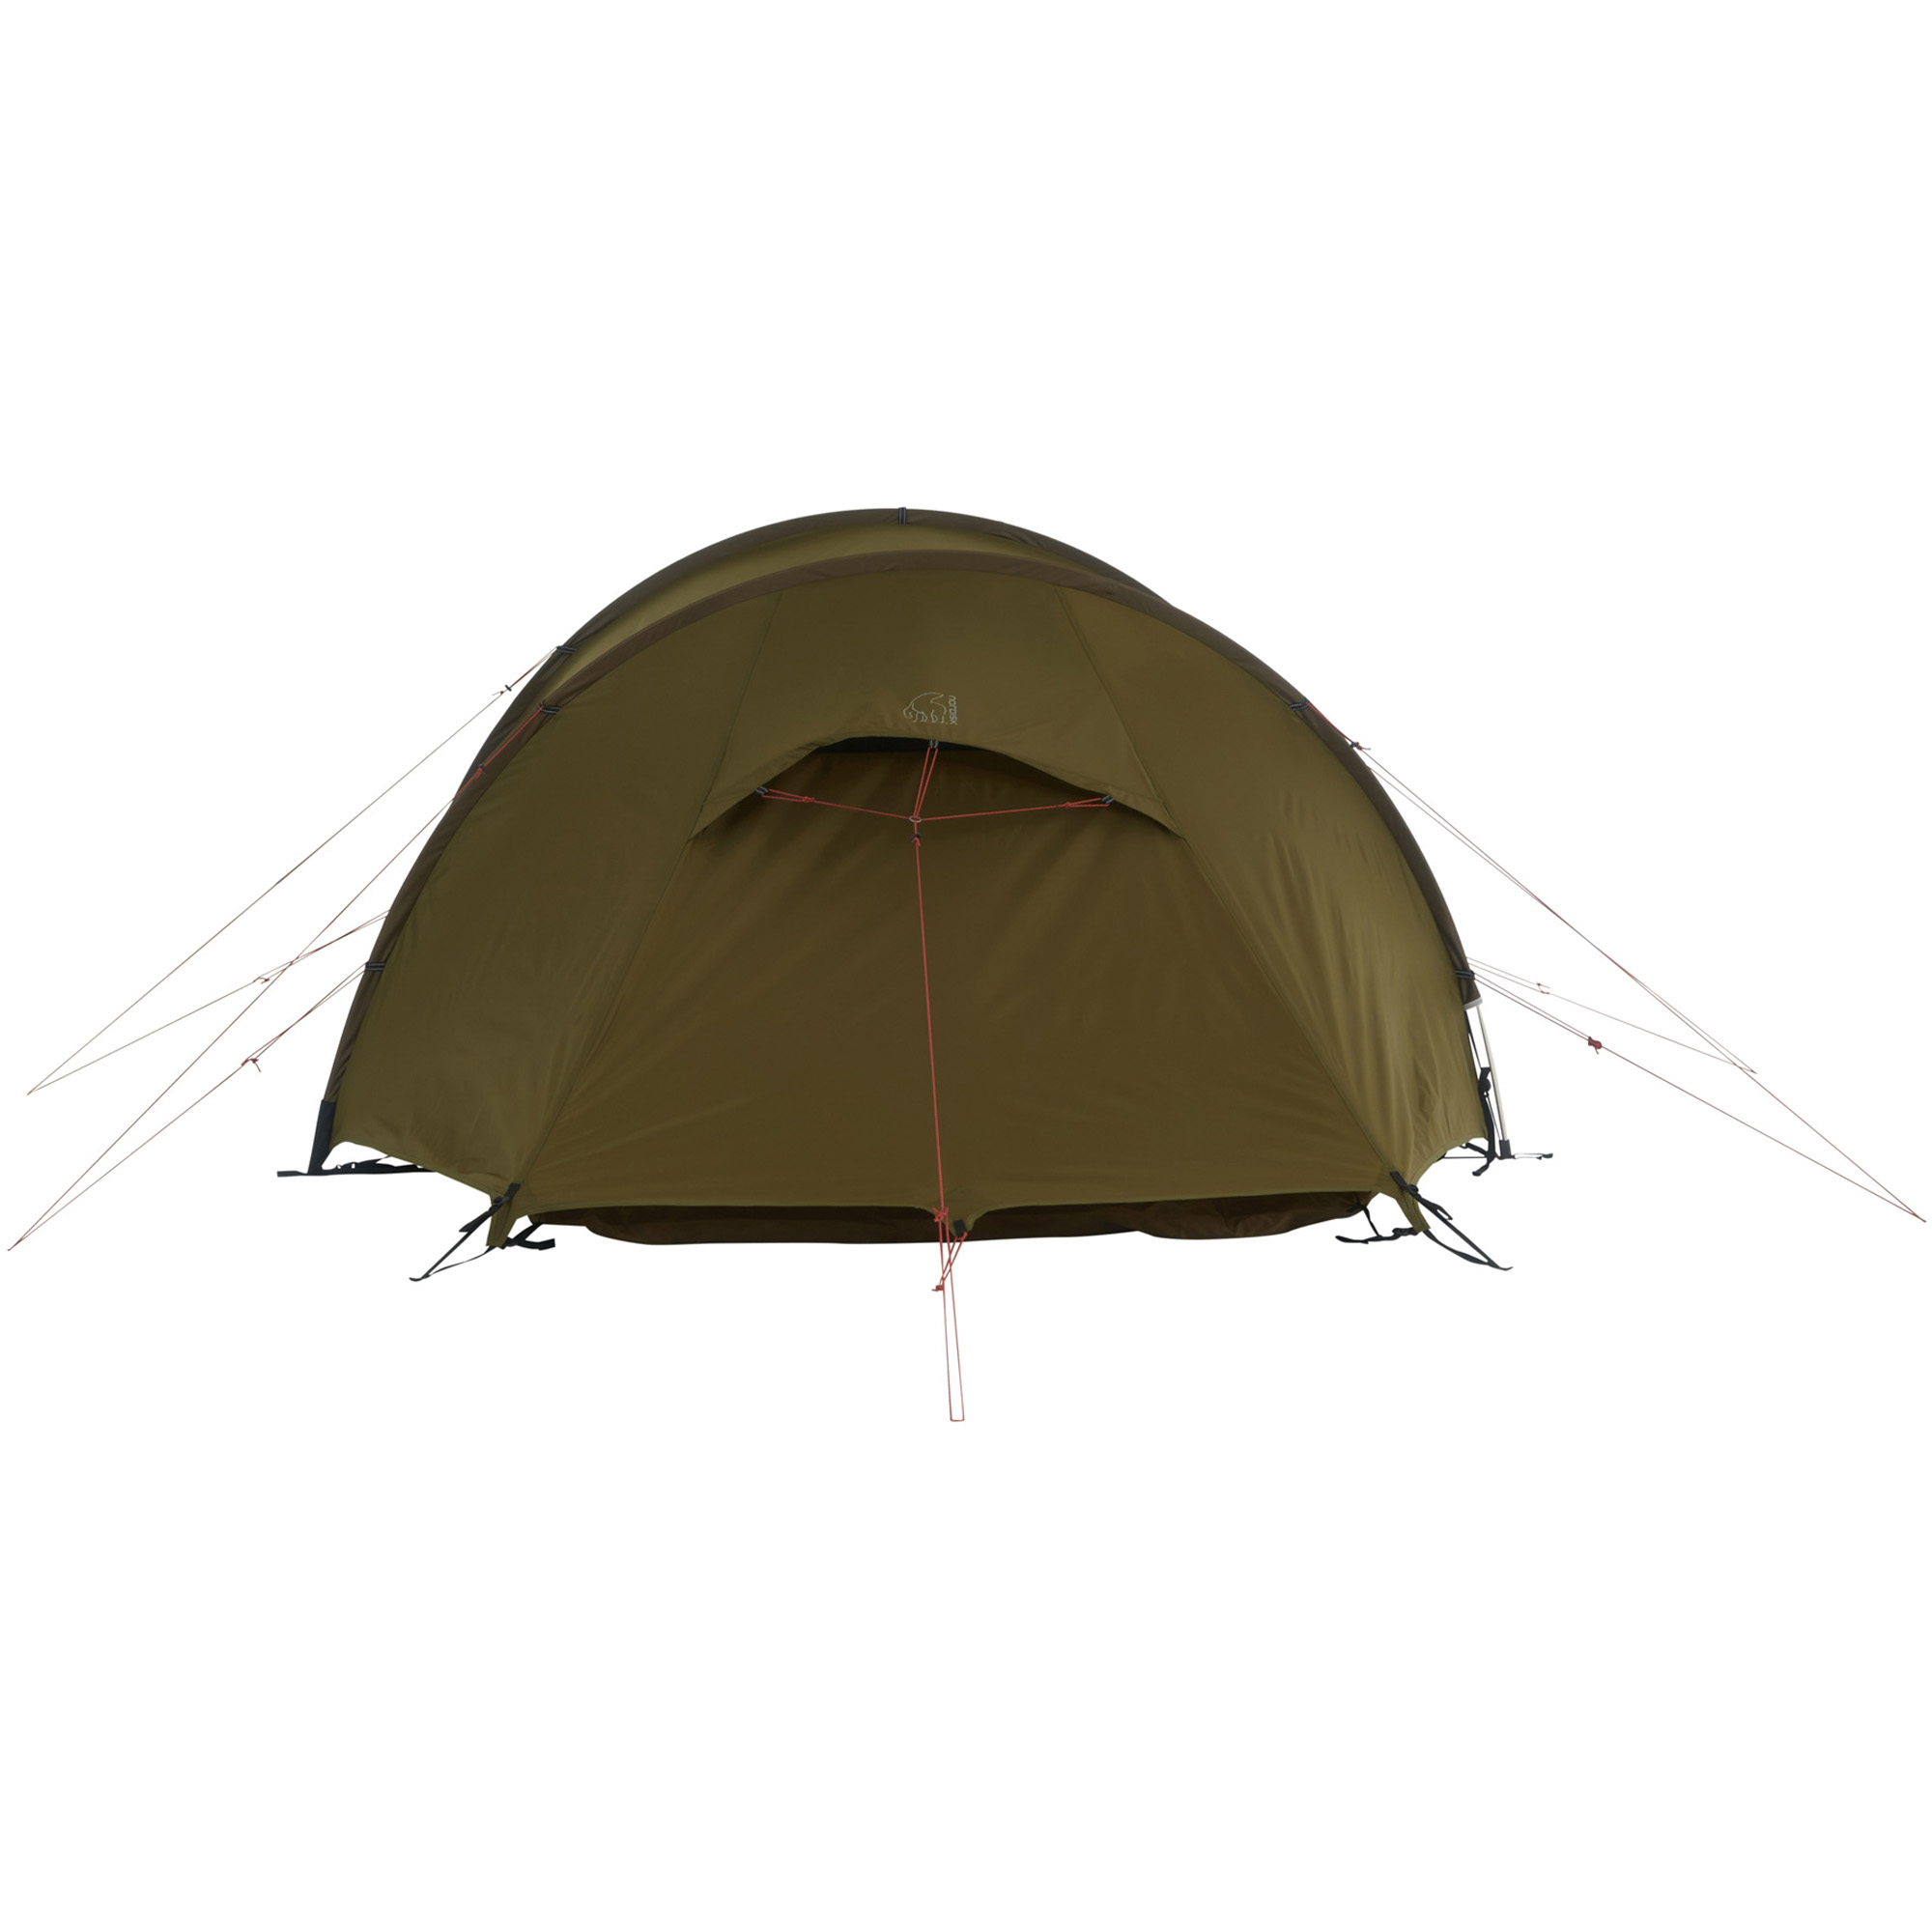 Nordisk Oppland 3 2.0 PU Backpacking Tent